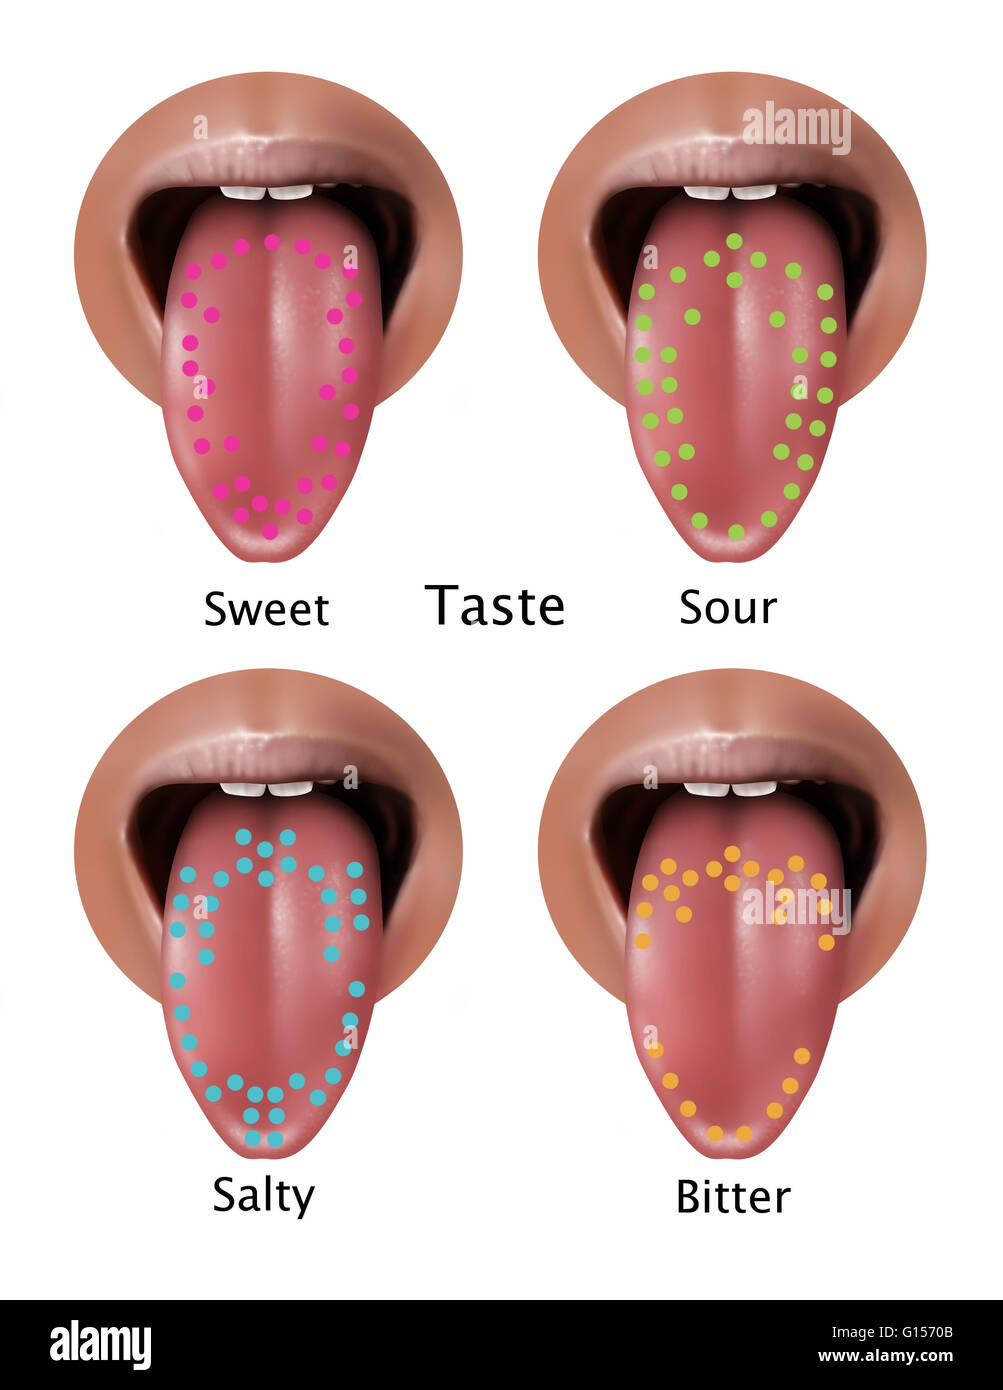 Illustration of regions of the tongue associated with certain taste types. From top left to bottom right: sweet, sour, salty and bitter. Stock Photo